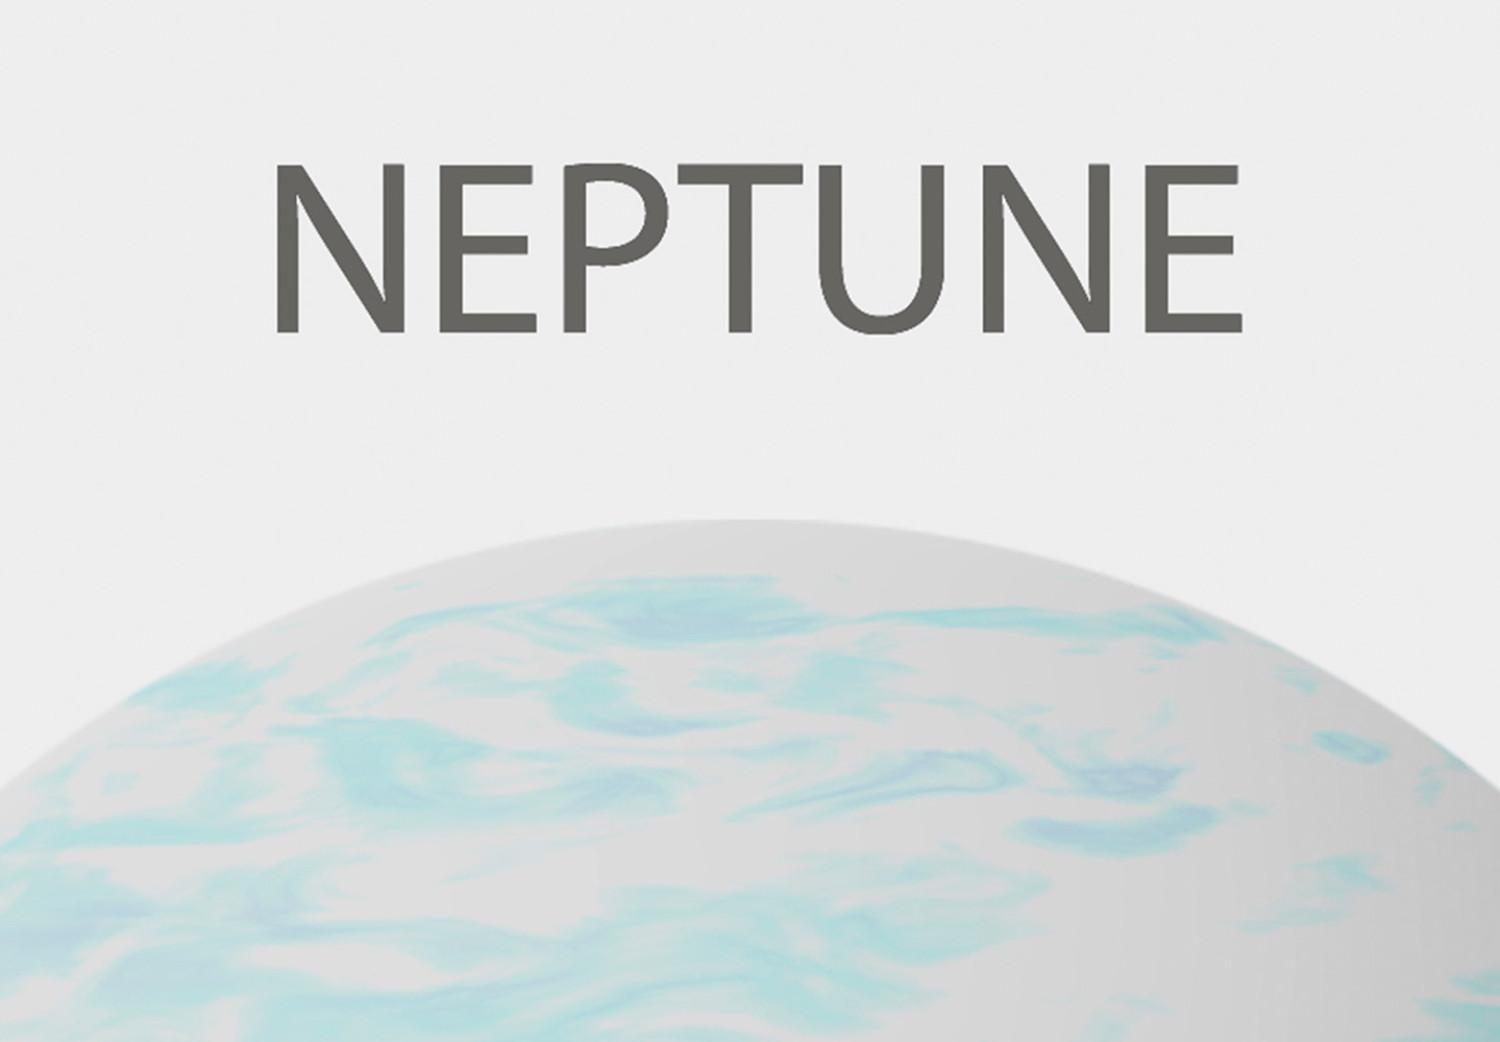 Poster Planet Neptune - Gas Giant with the Solar System II